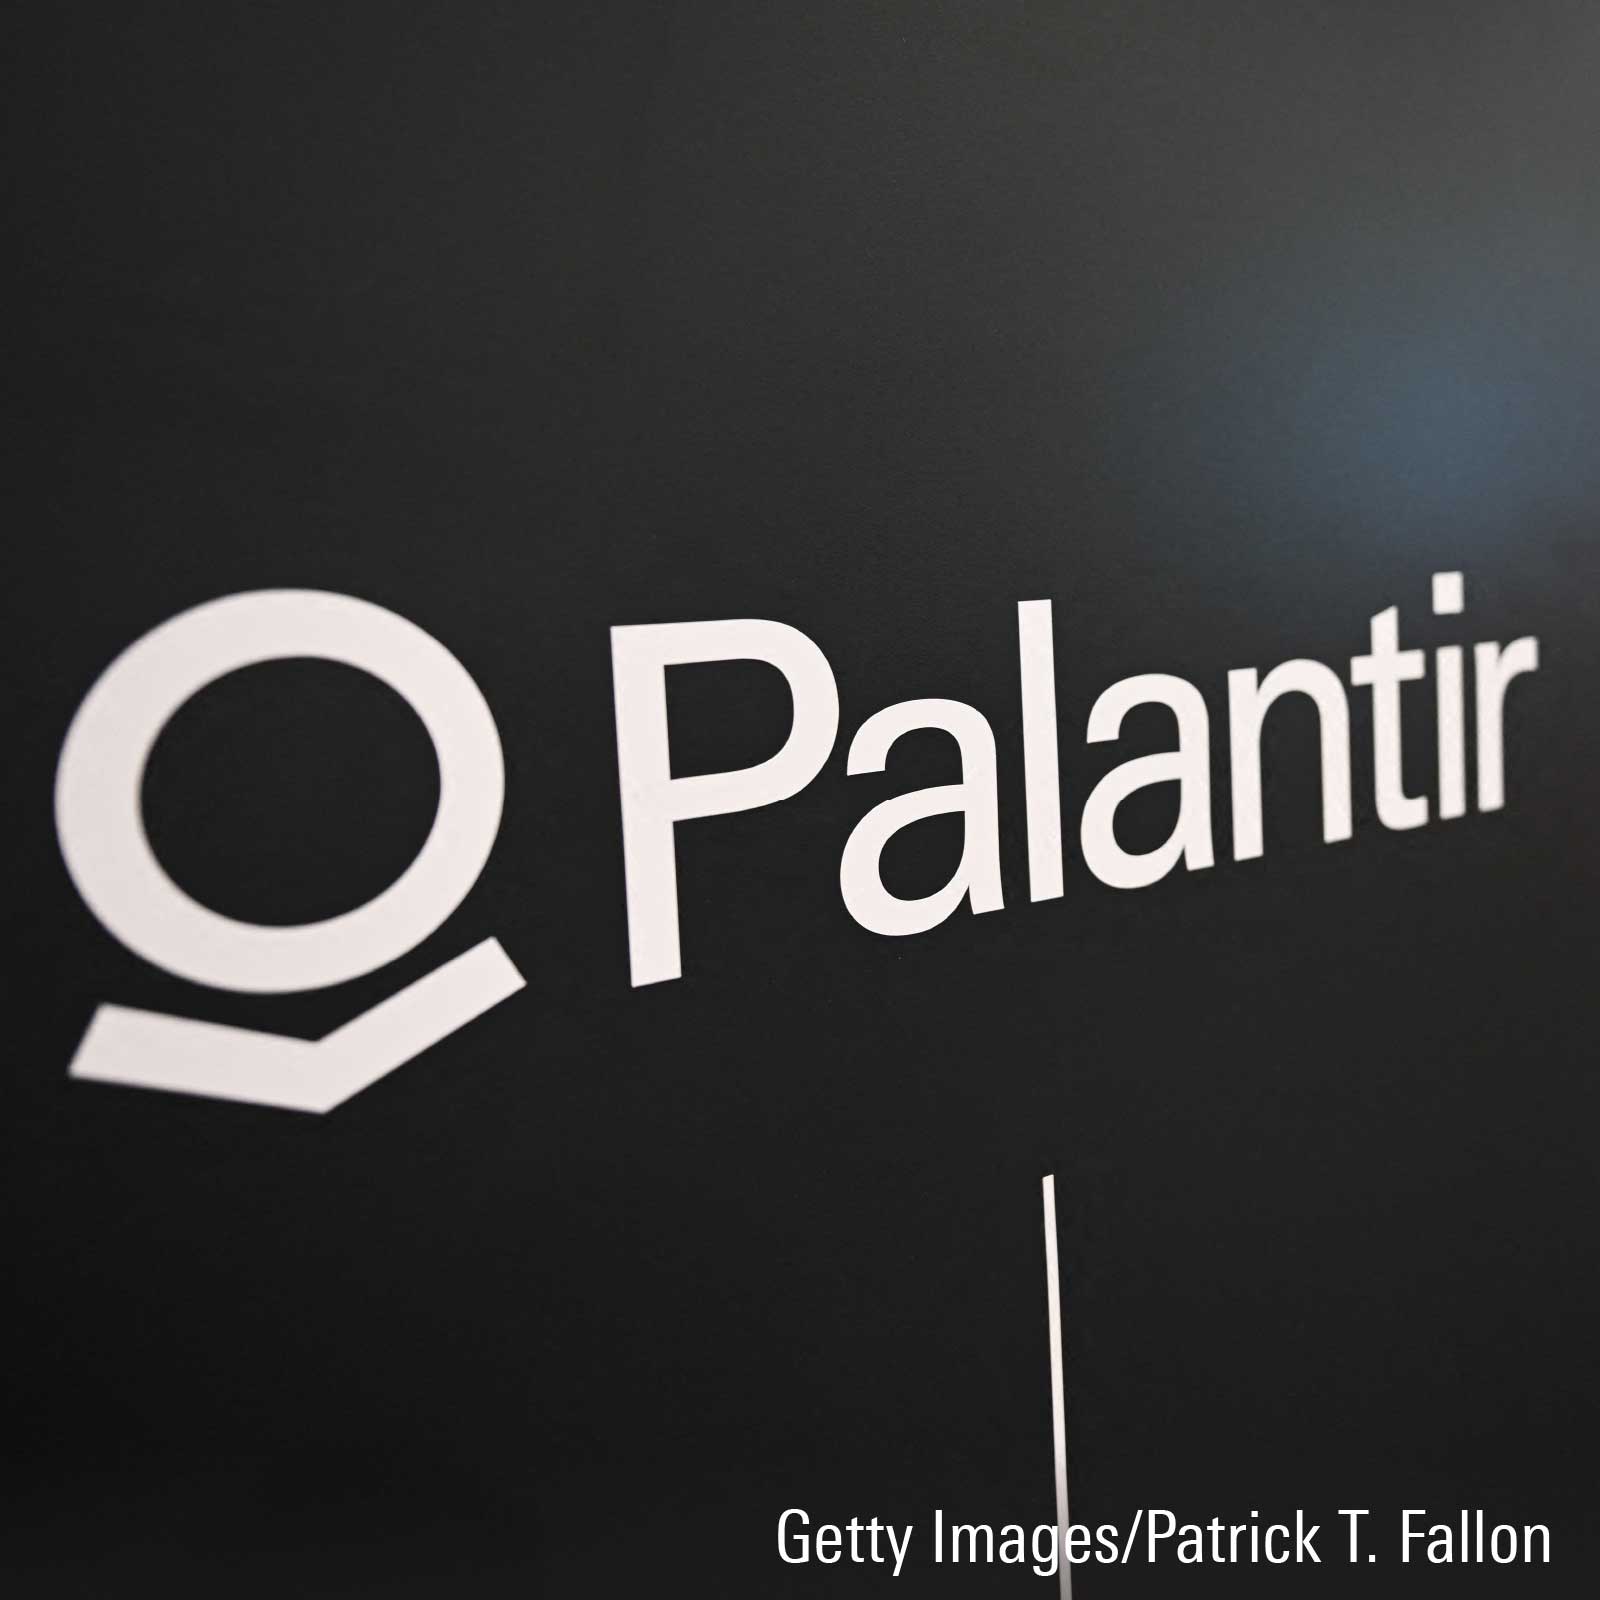 Going Into Earnings, Is Palantir Stock a Buy, a Sell, or Fairly Valued?